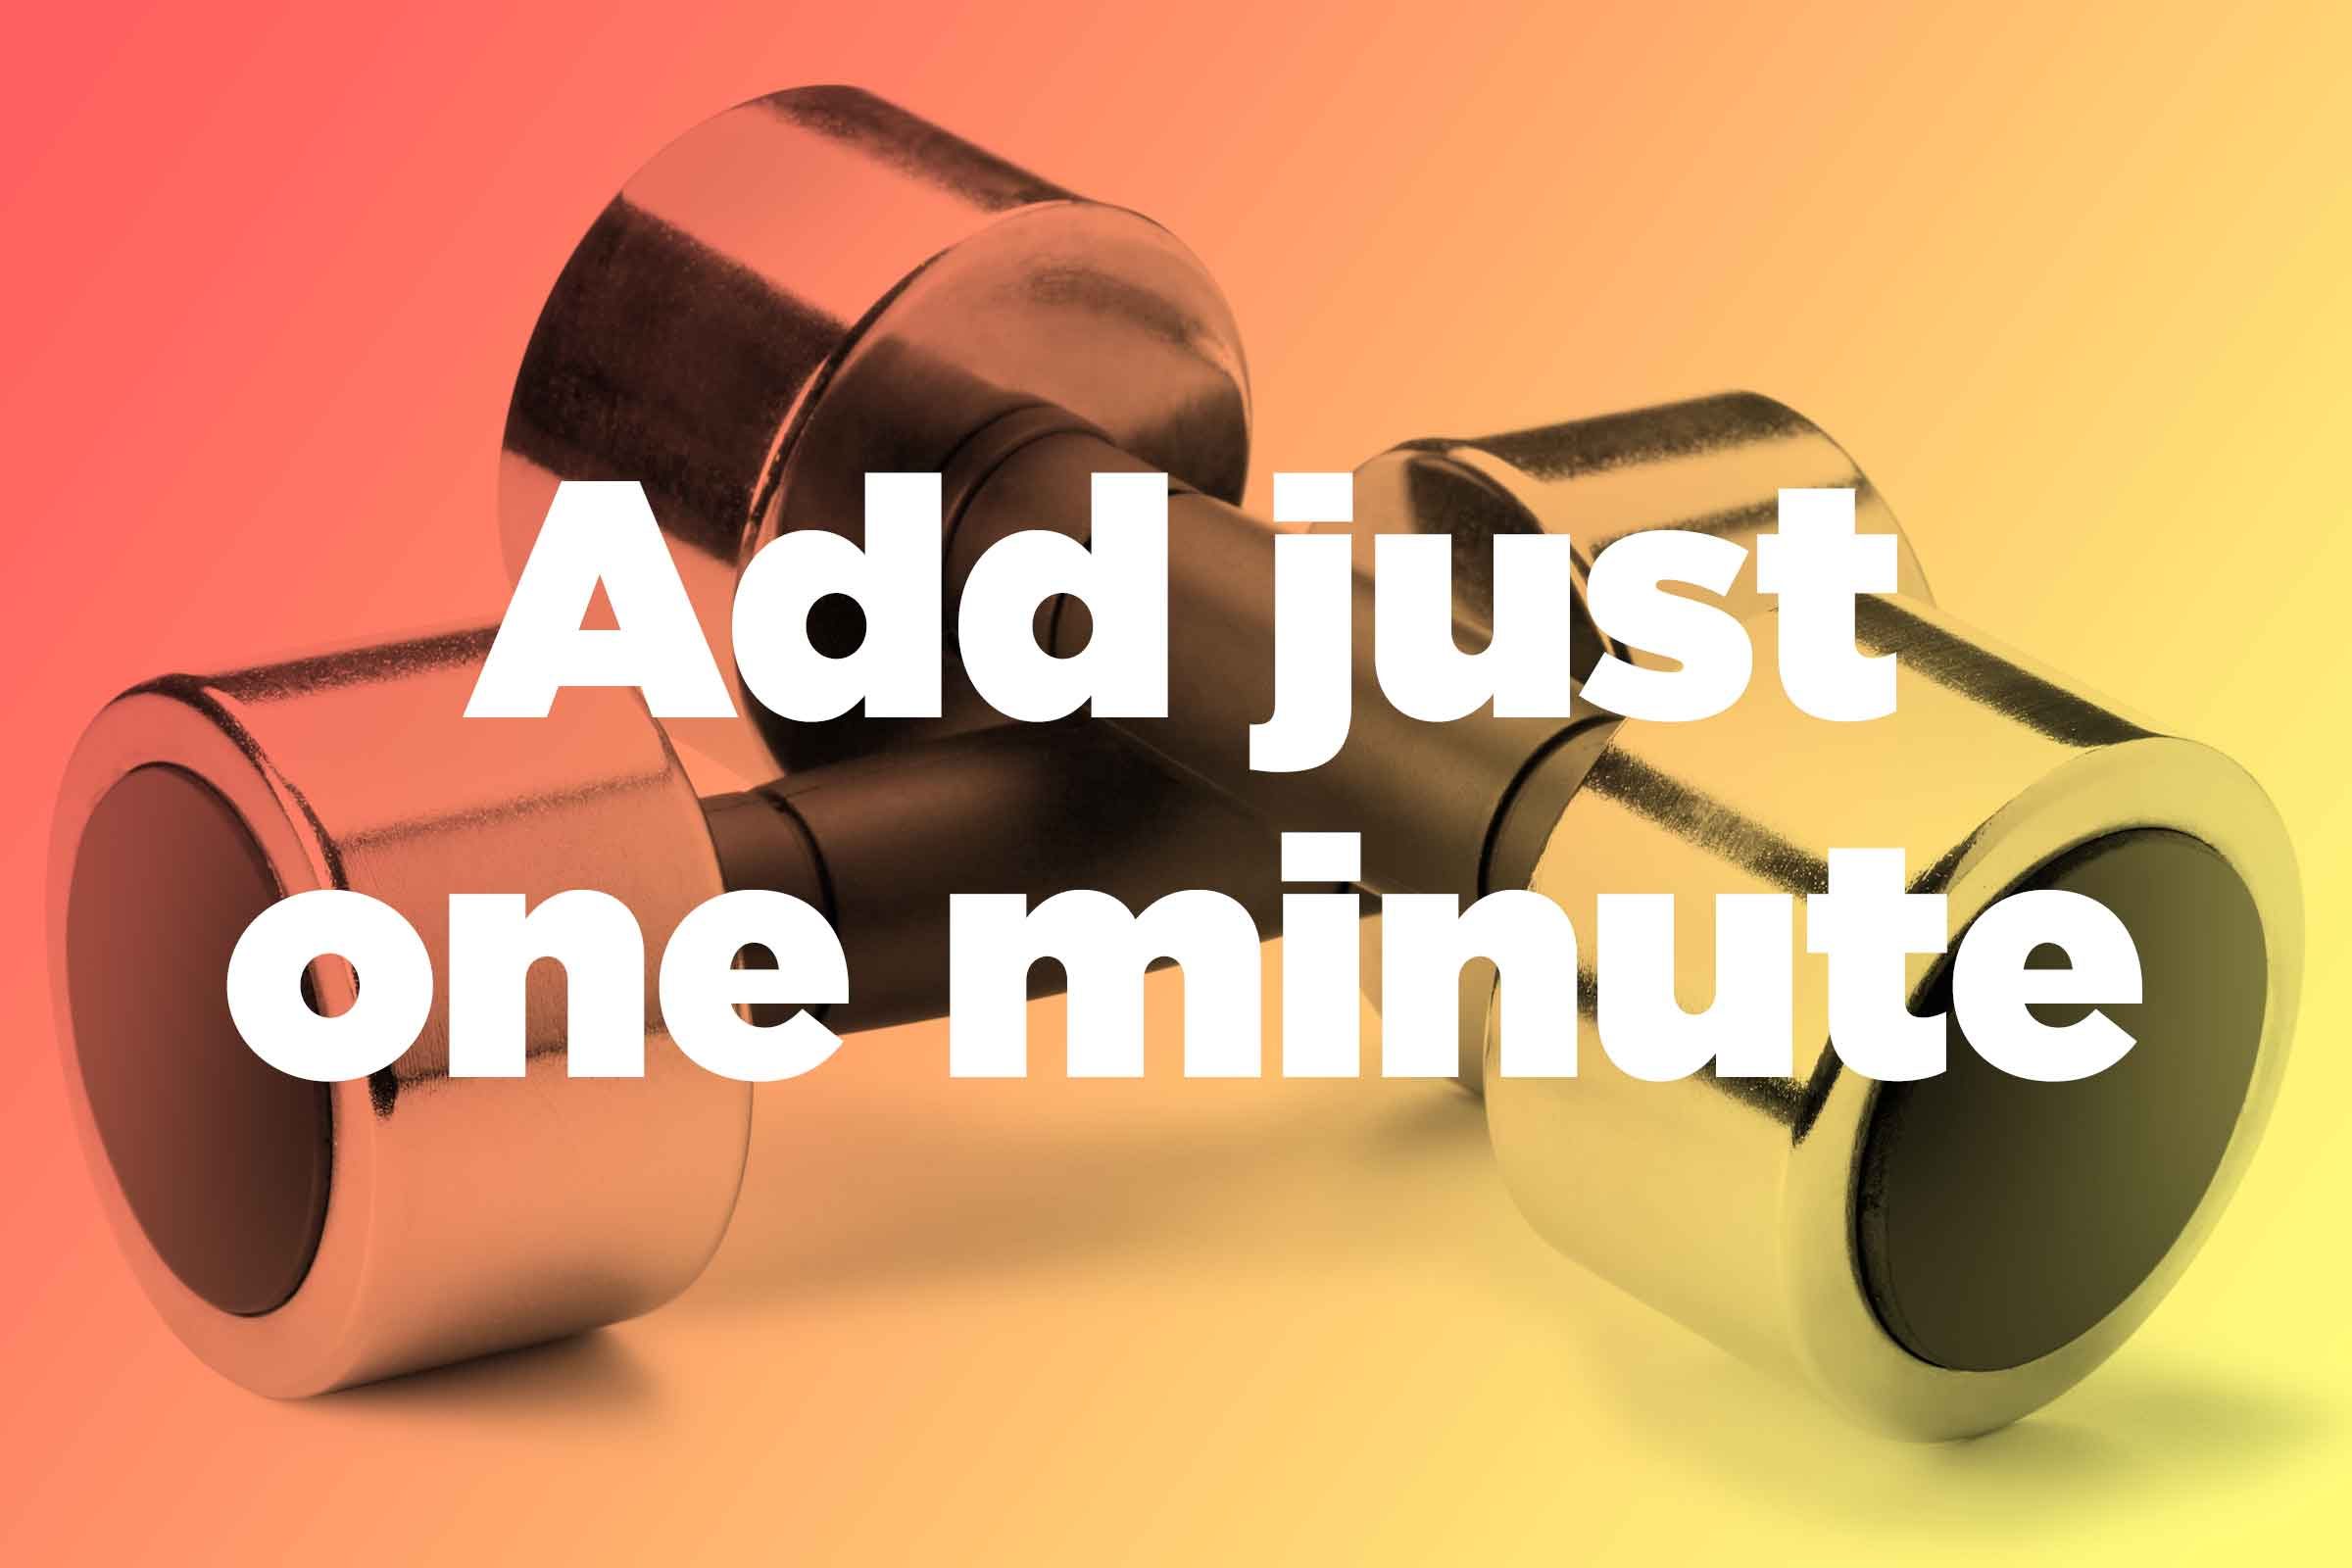 Add just one minute a day